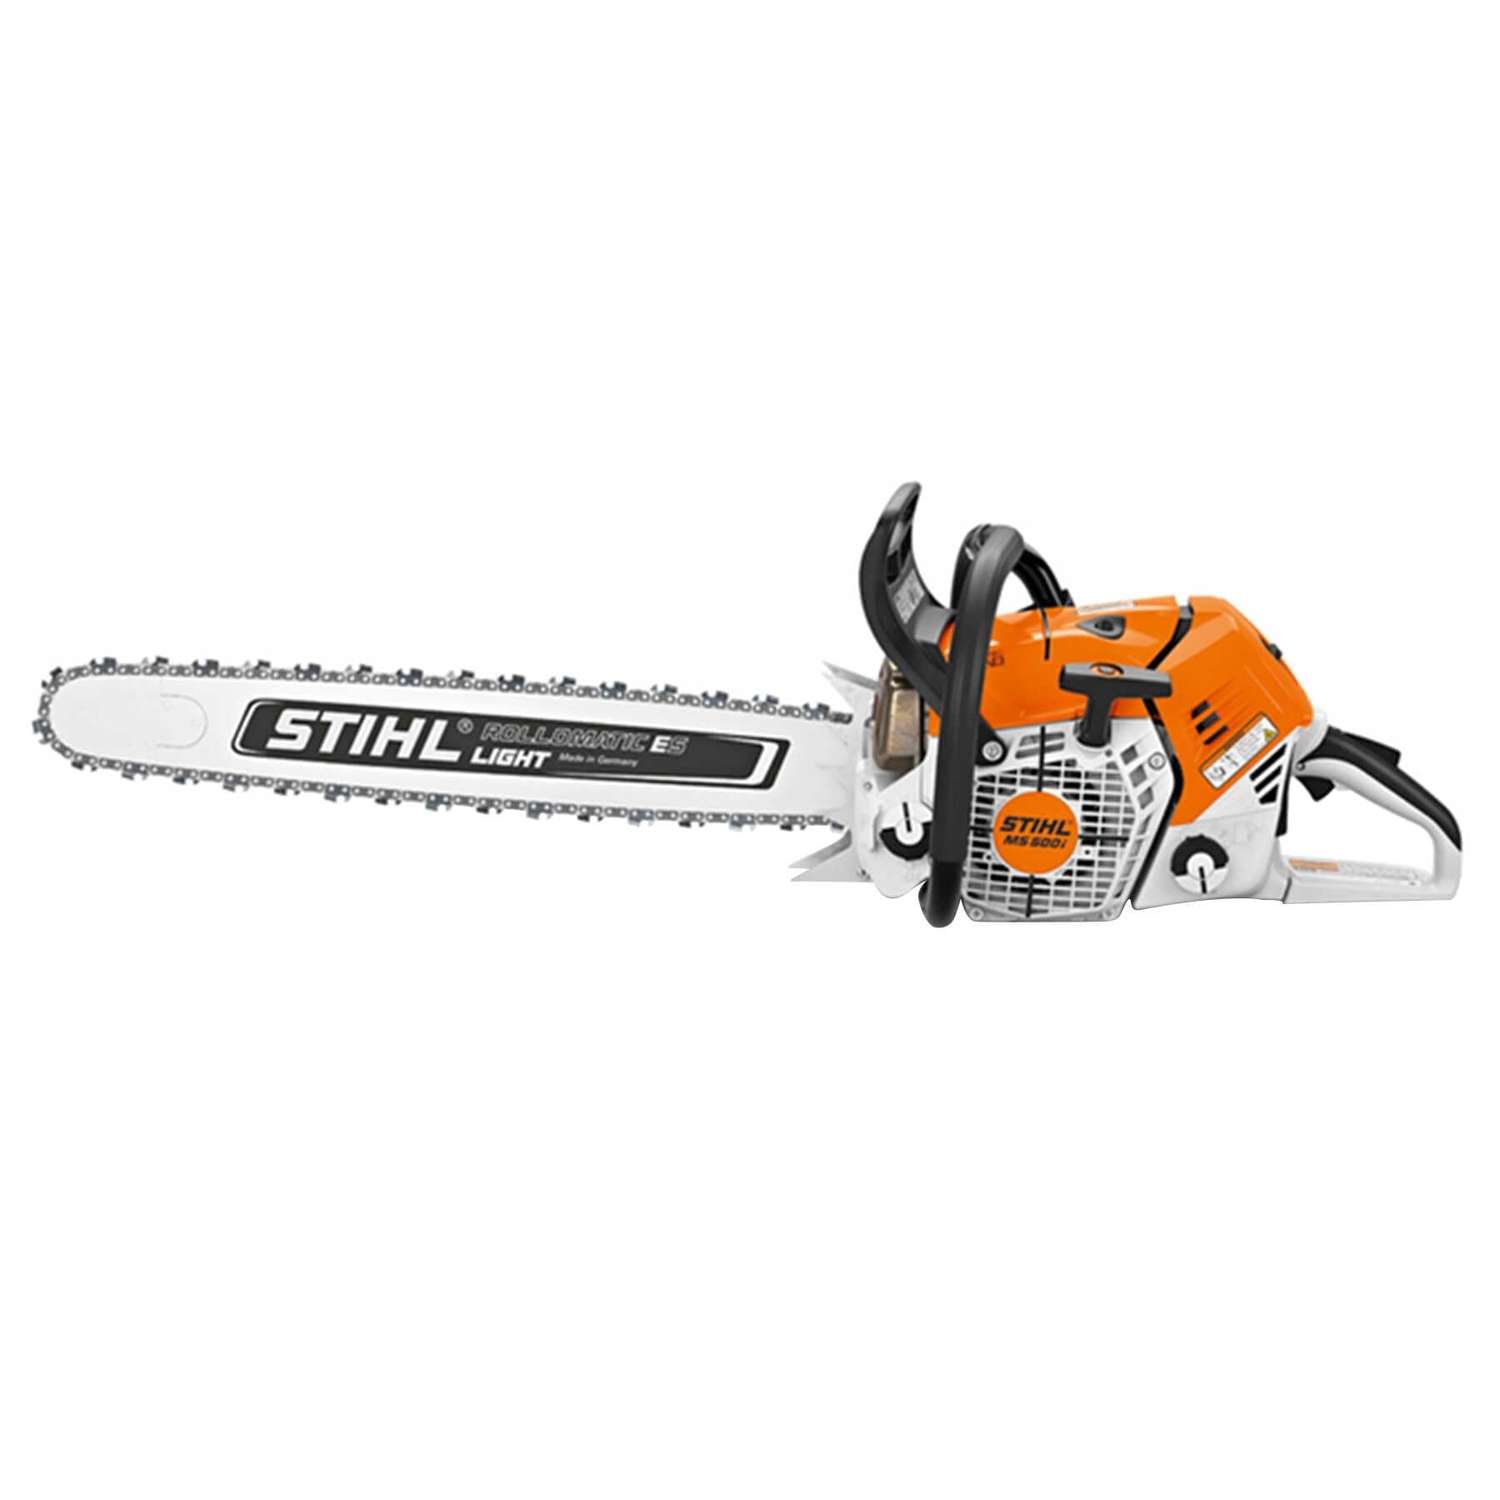 STIHL MS 500i R 25 in. 79.2 cc Gas Light Chainsaw - Ace Hardware